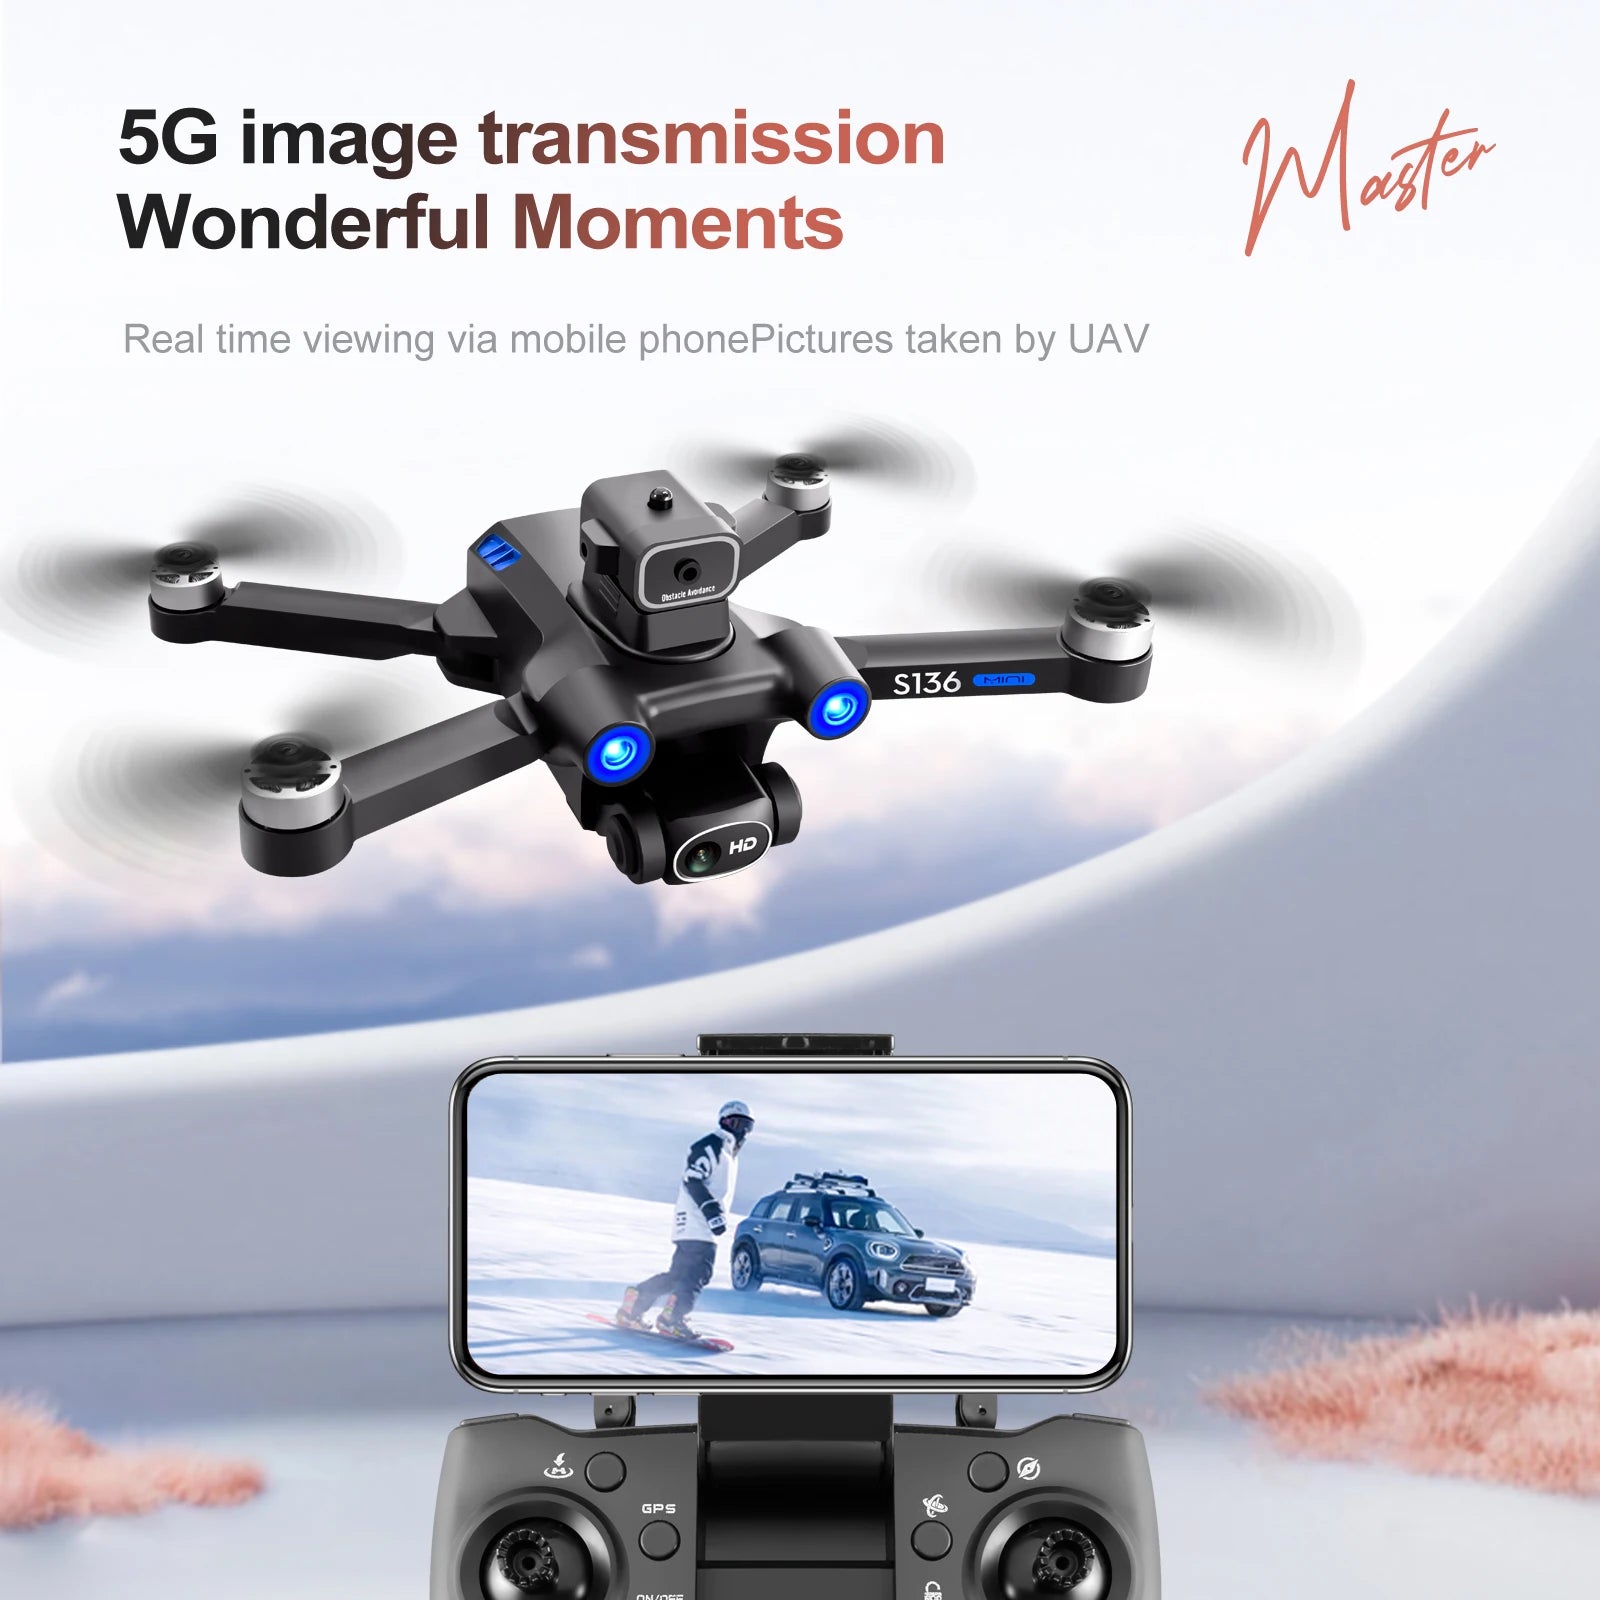 S136 GPS Drone, 5G image transmissionModi Wonderful Moments Real time viewing via mobile phonePictures taken